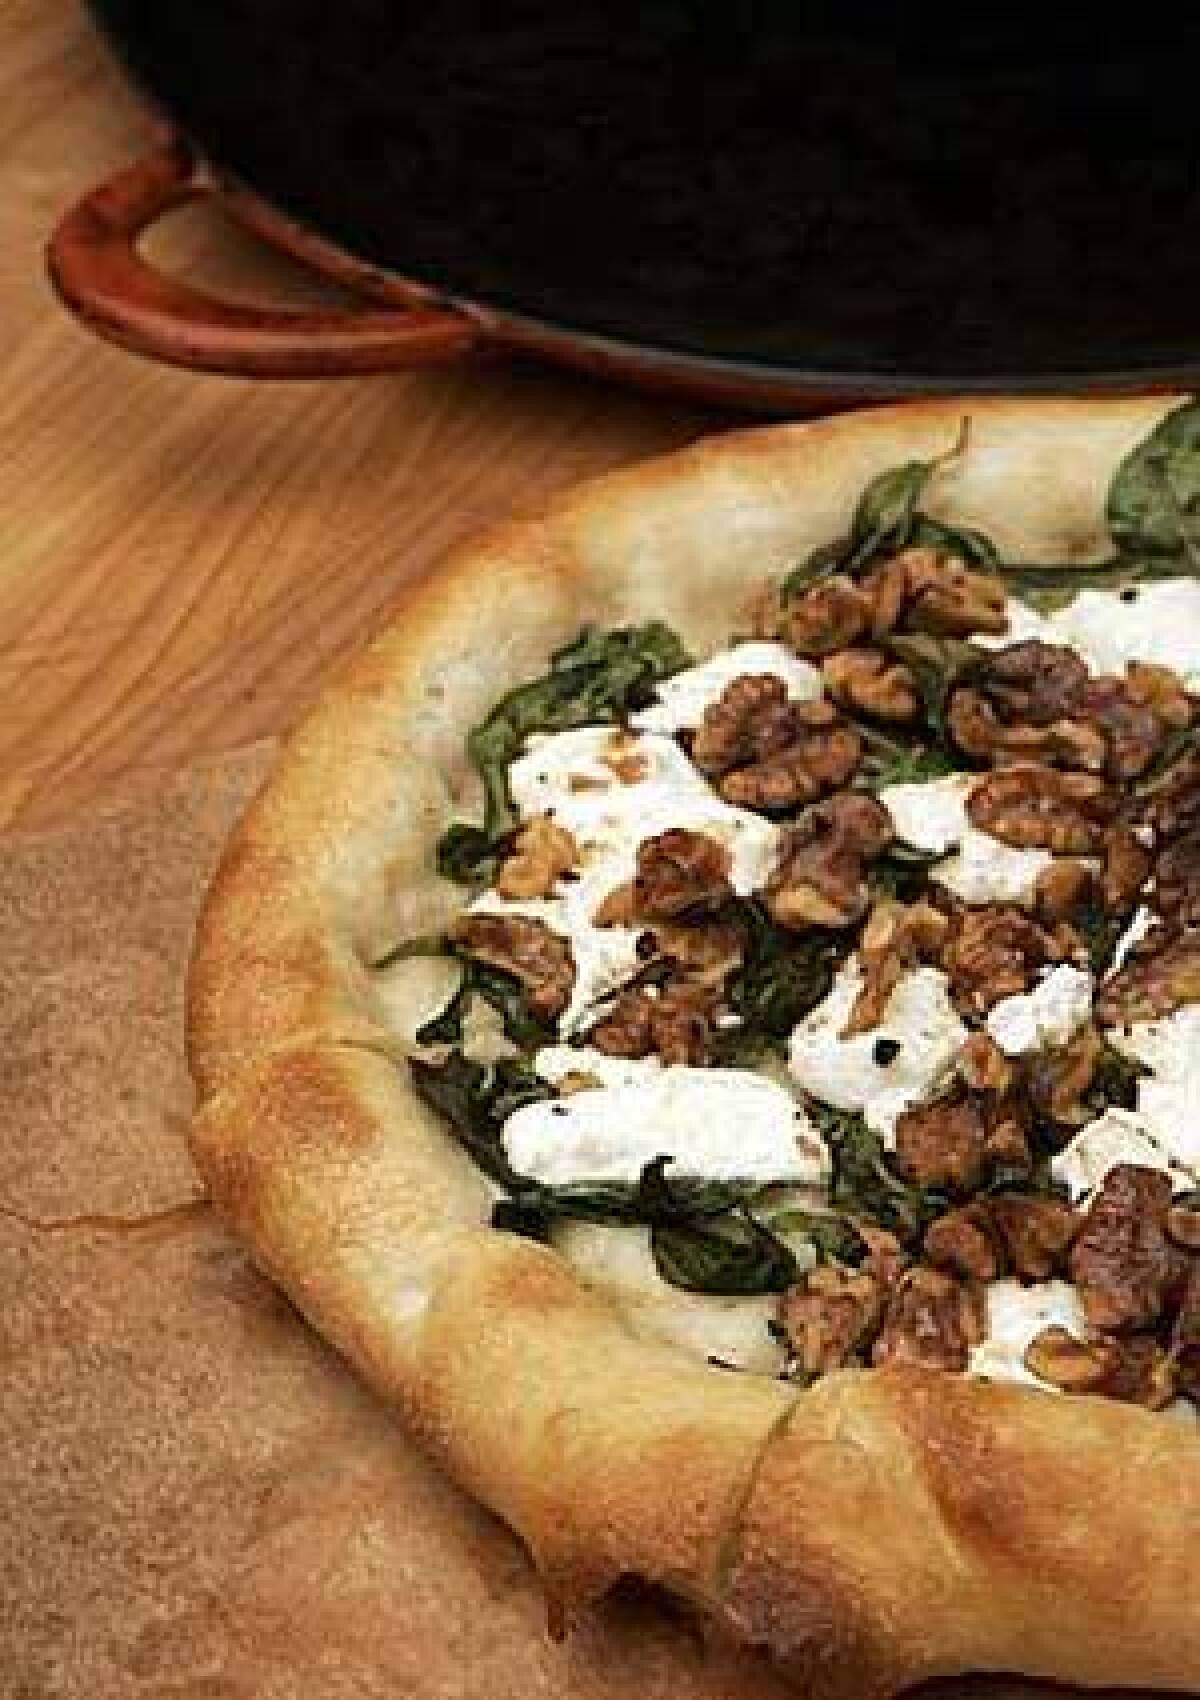 The nonbreakable (whew!) Batali pizza pan trumps stone. Use it to toast walnuts for a goat cheese-arugula pizza.